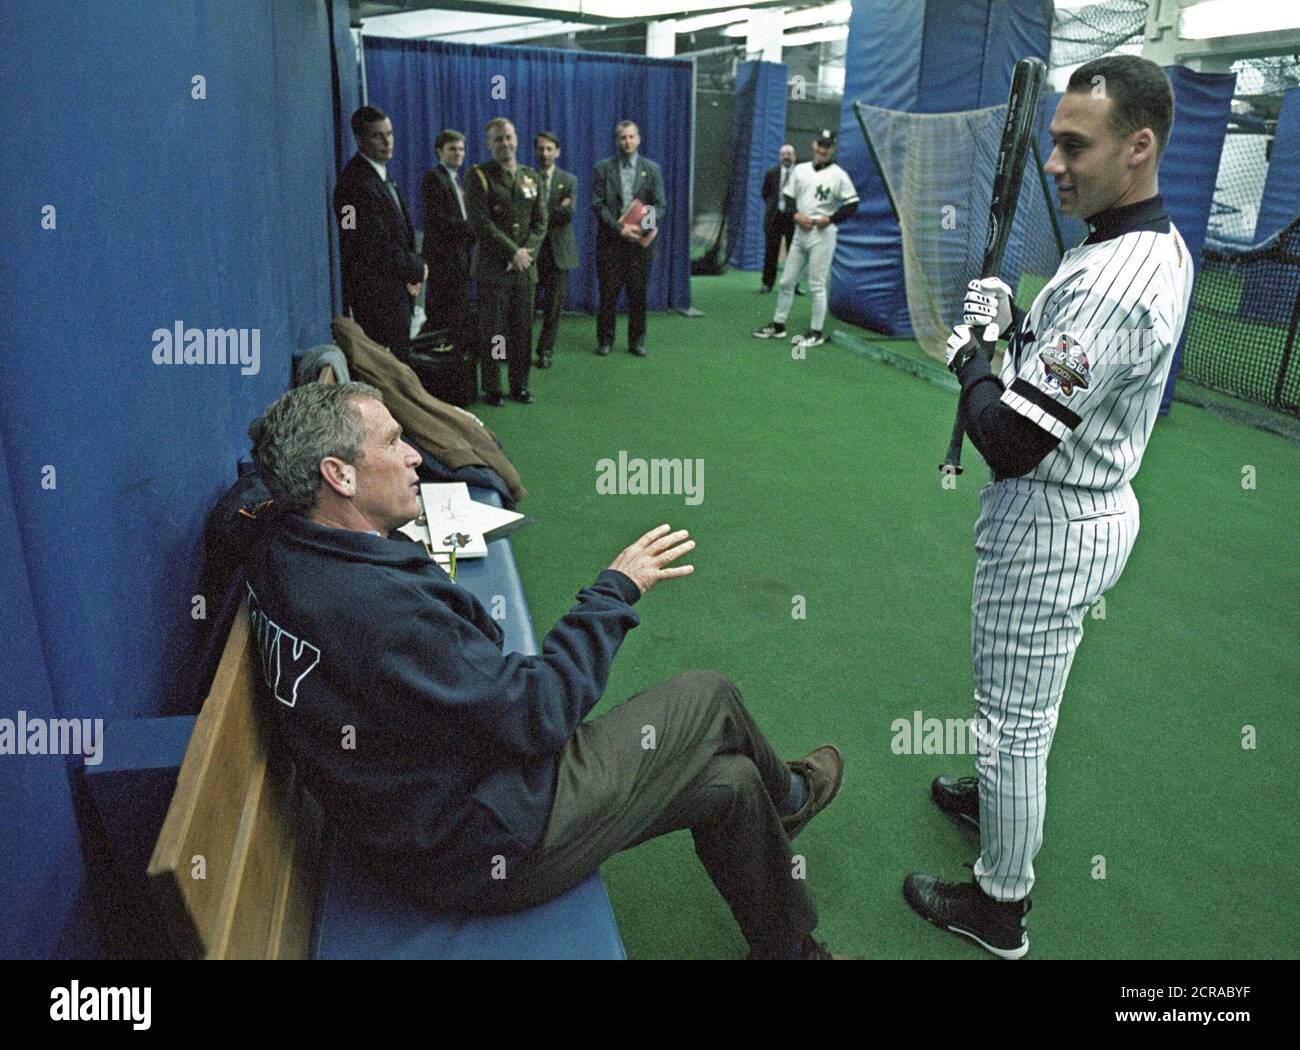 President George W. Bush talks with Yankee shortstop Derek Jeter Tuesday, Oct. 30, 2001, before throwing out the ceremonial first pitch in Game Three of the World Series between the Arizona Diamondbacks and the New York Yankees at Yankee Stadium in New York.  Photo by Eric Draper, Courtesy of the George W. Bush Presidential Library Stock Photo